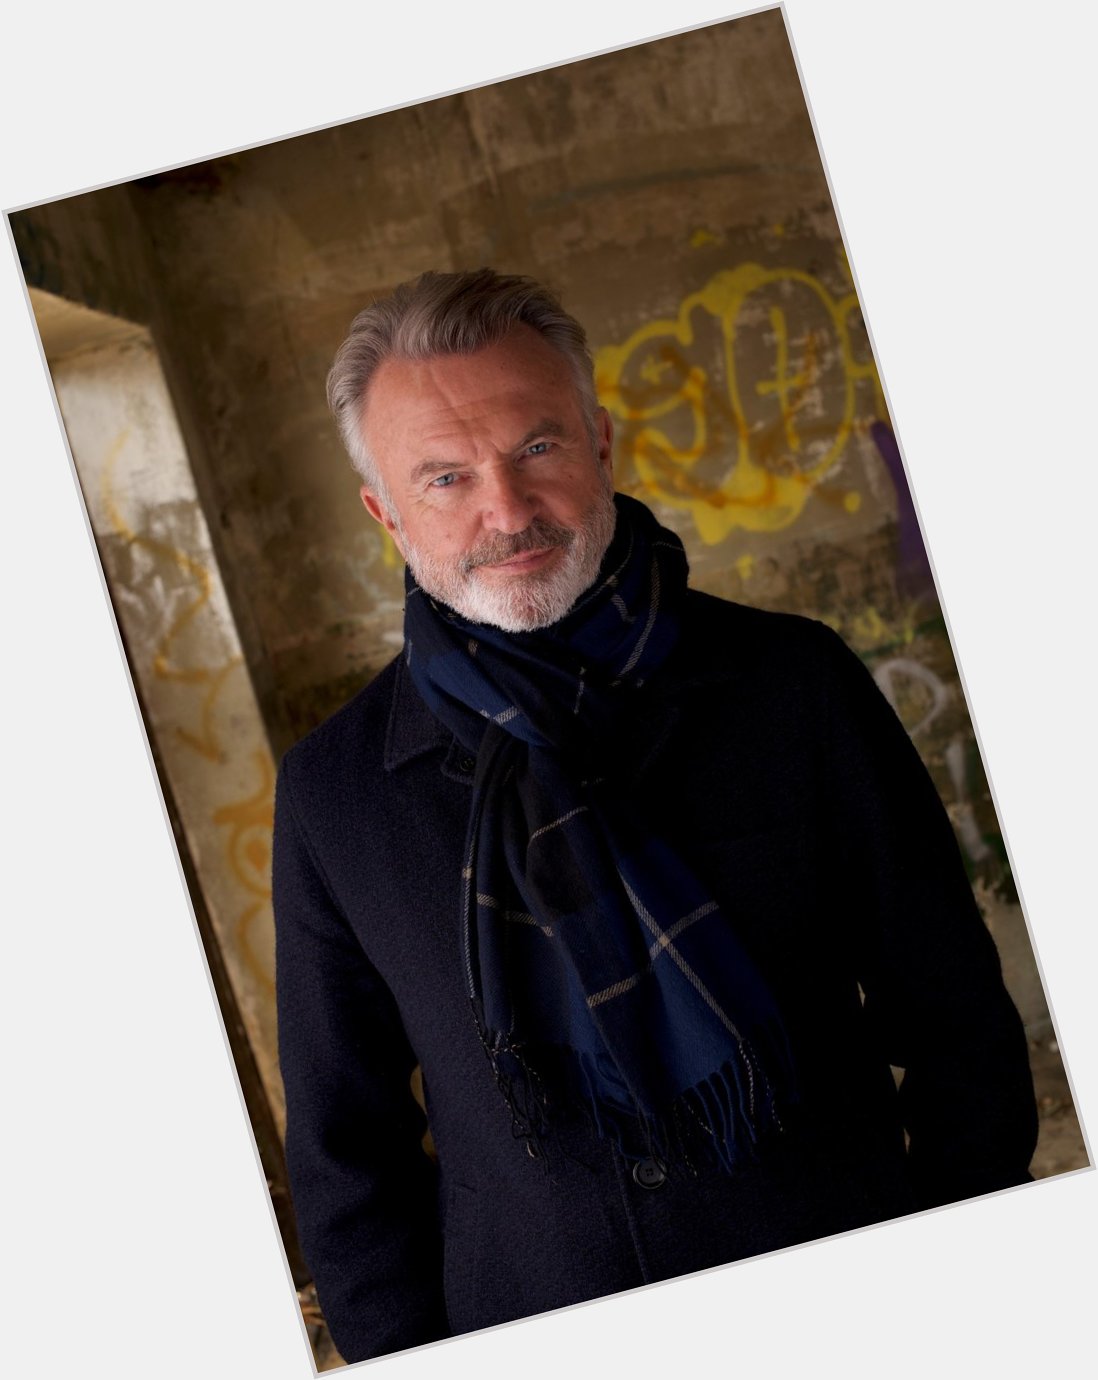 Happy Birthday Sam Neill! Born in 1947, he has appeared in many films. What s your favorite movie he has been in? 